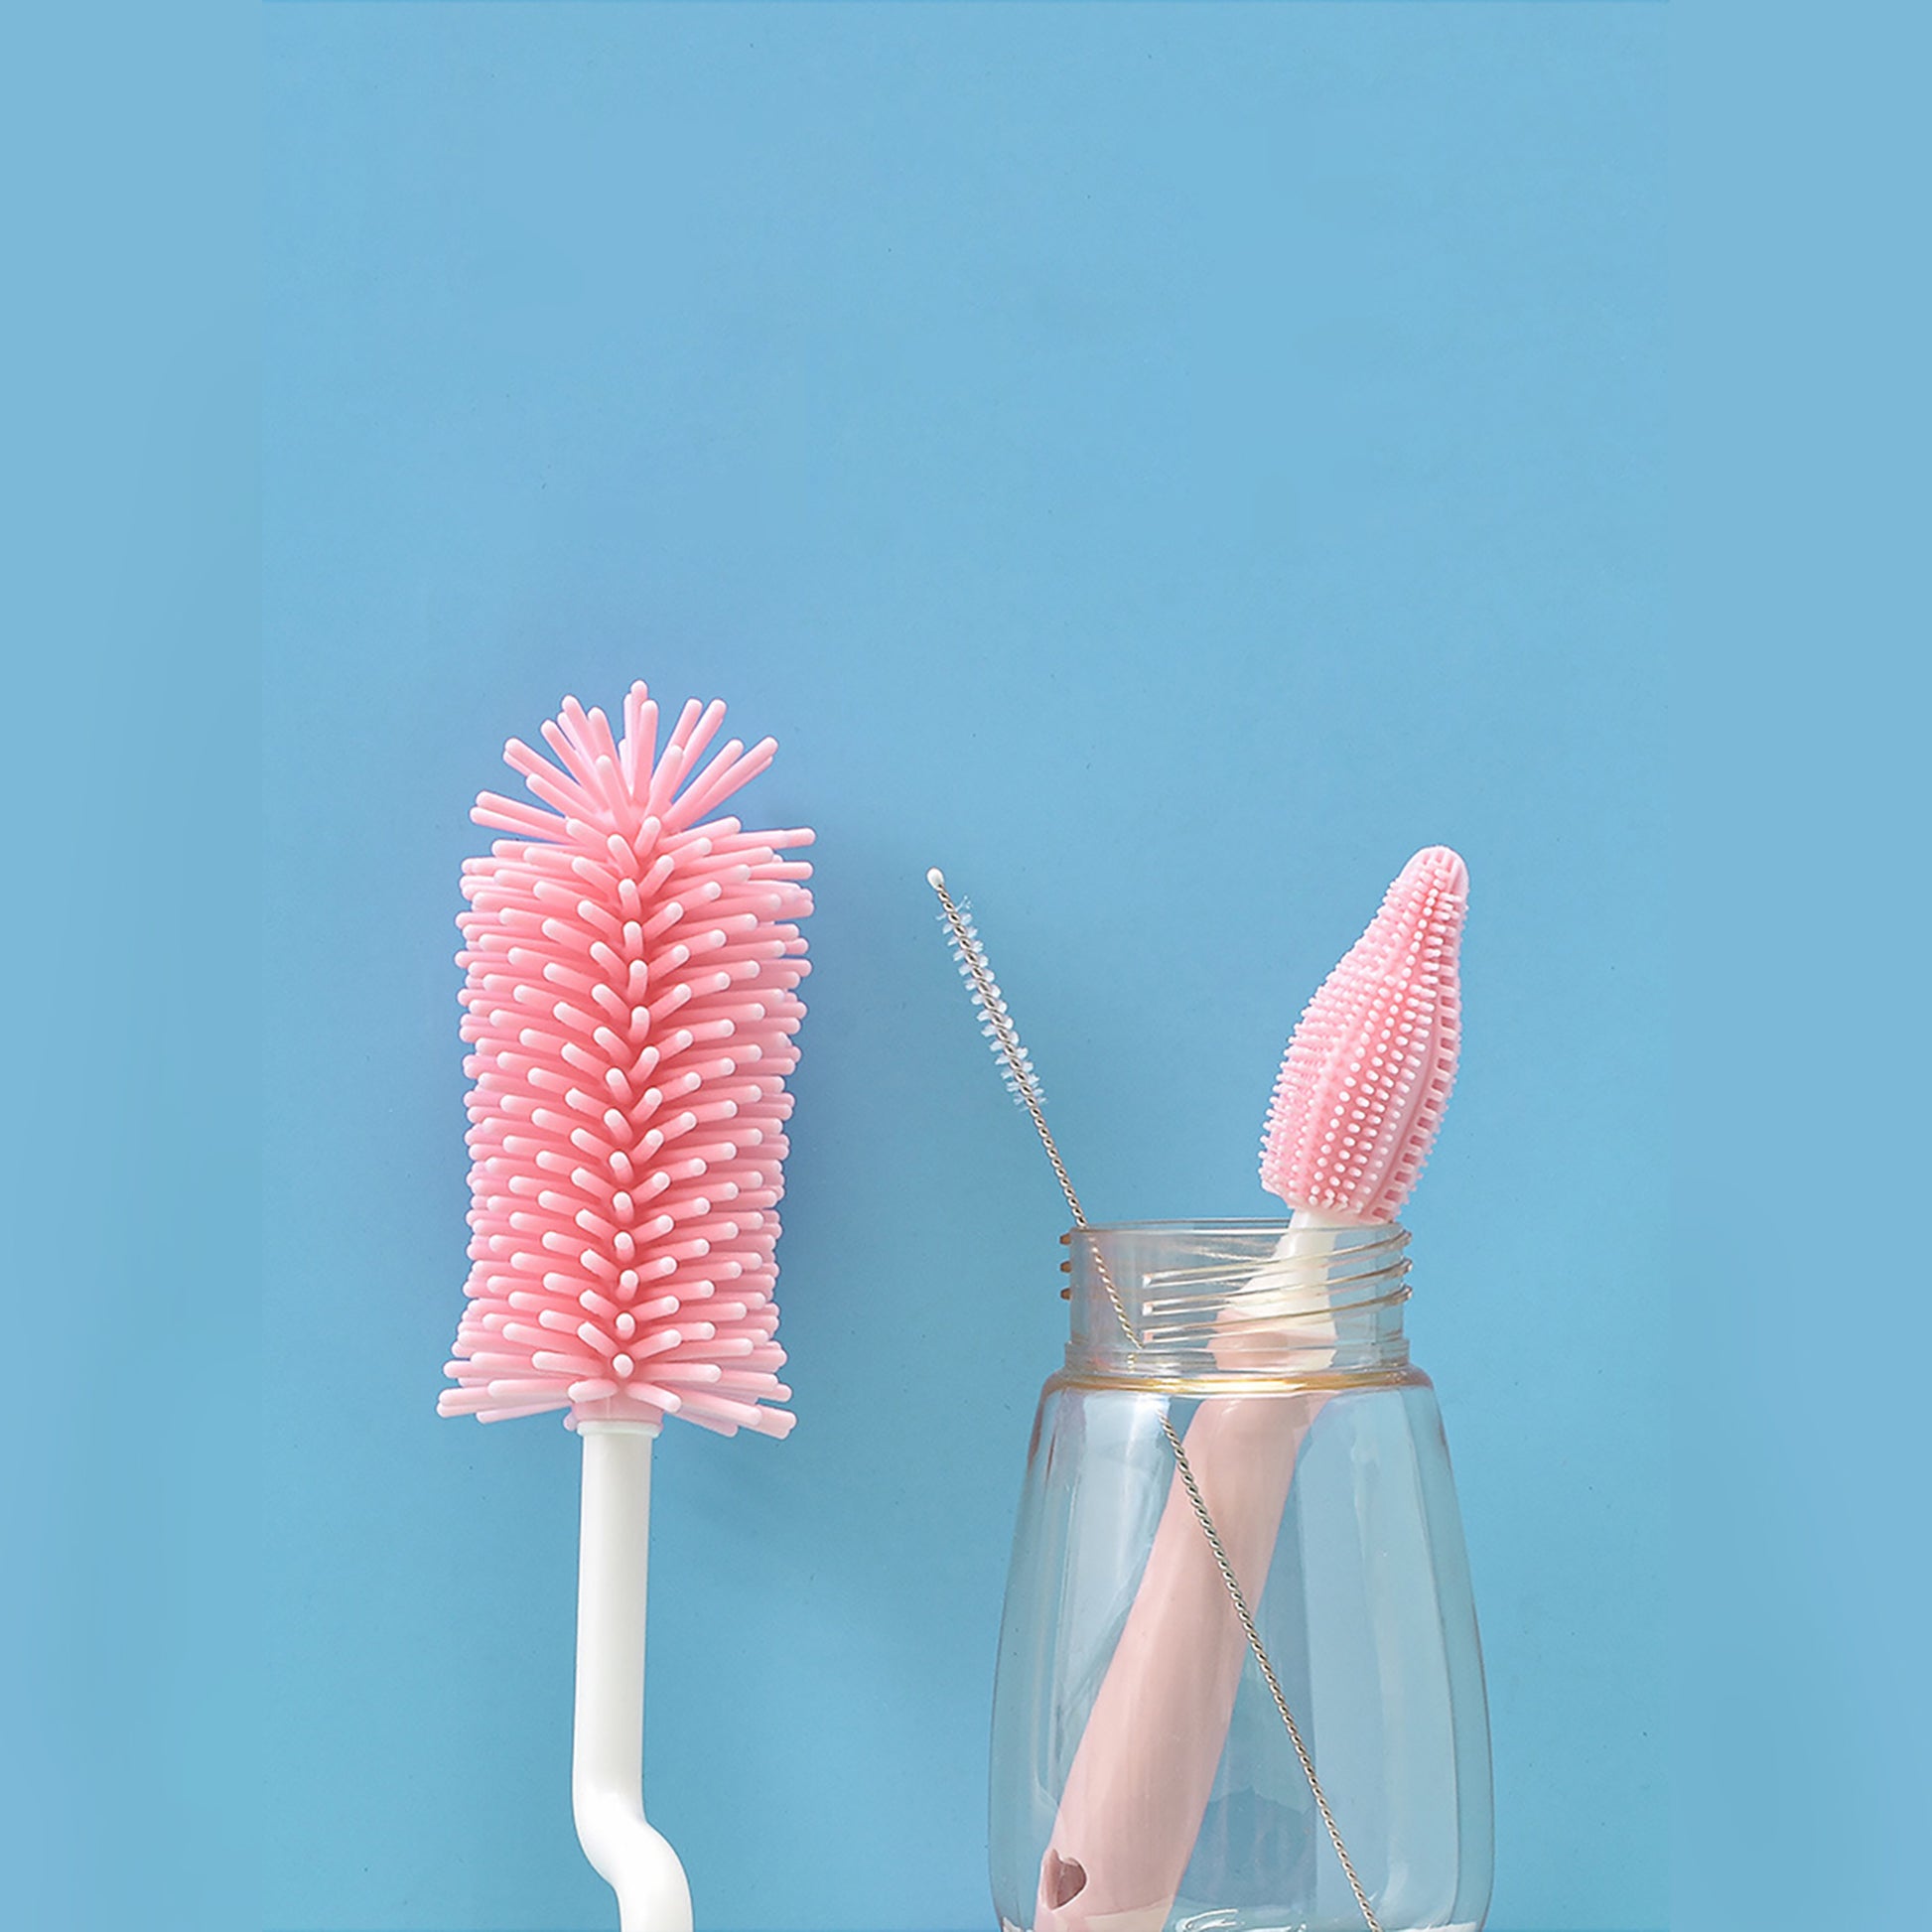  Long Bottle Brush Cleaner Set (3-in-1) and Straw